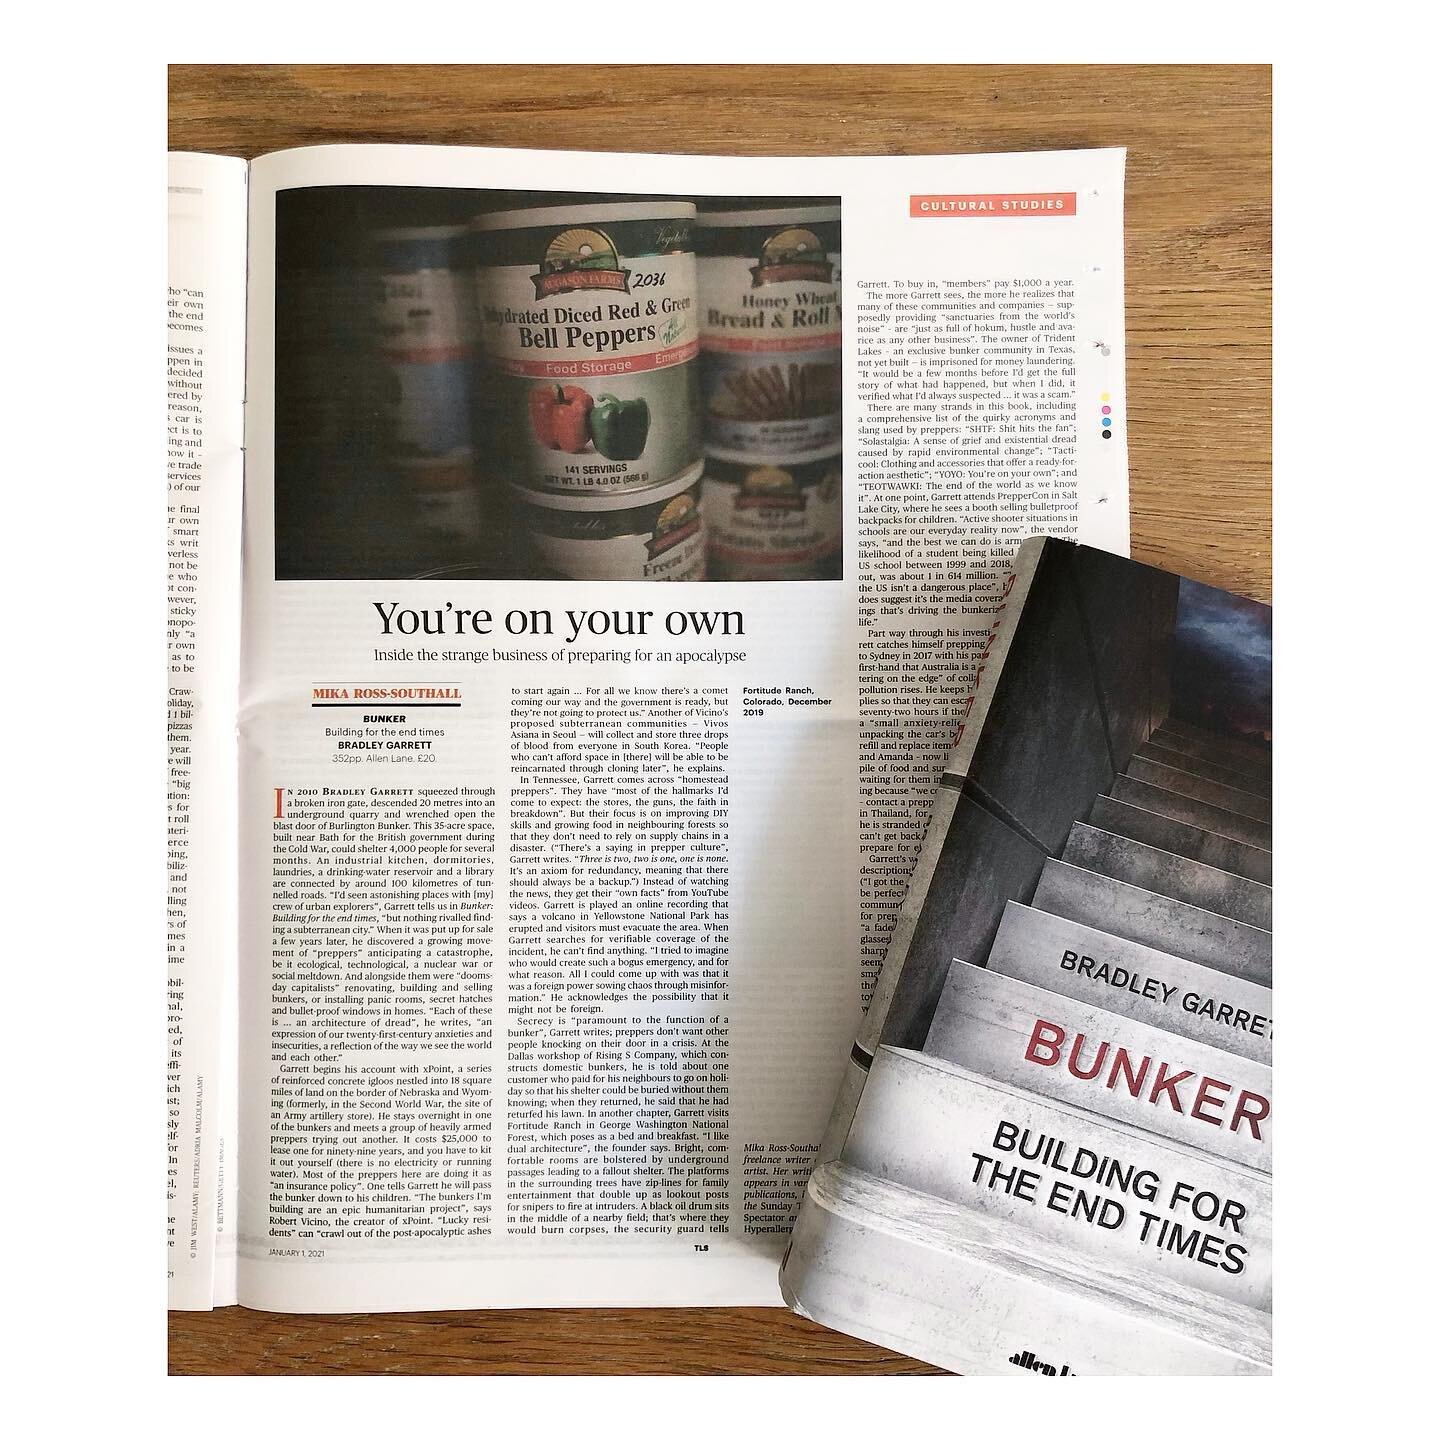 I&rsquo;ve written about bunkers and preparing for the end of the world, for The Times Literary Supplement. Happy new year everyone! 🥴 Link to the piece on my website in bio
.
.
.
#mika_ross_southall #studio #thetimesliterarysupplement #culturaljour